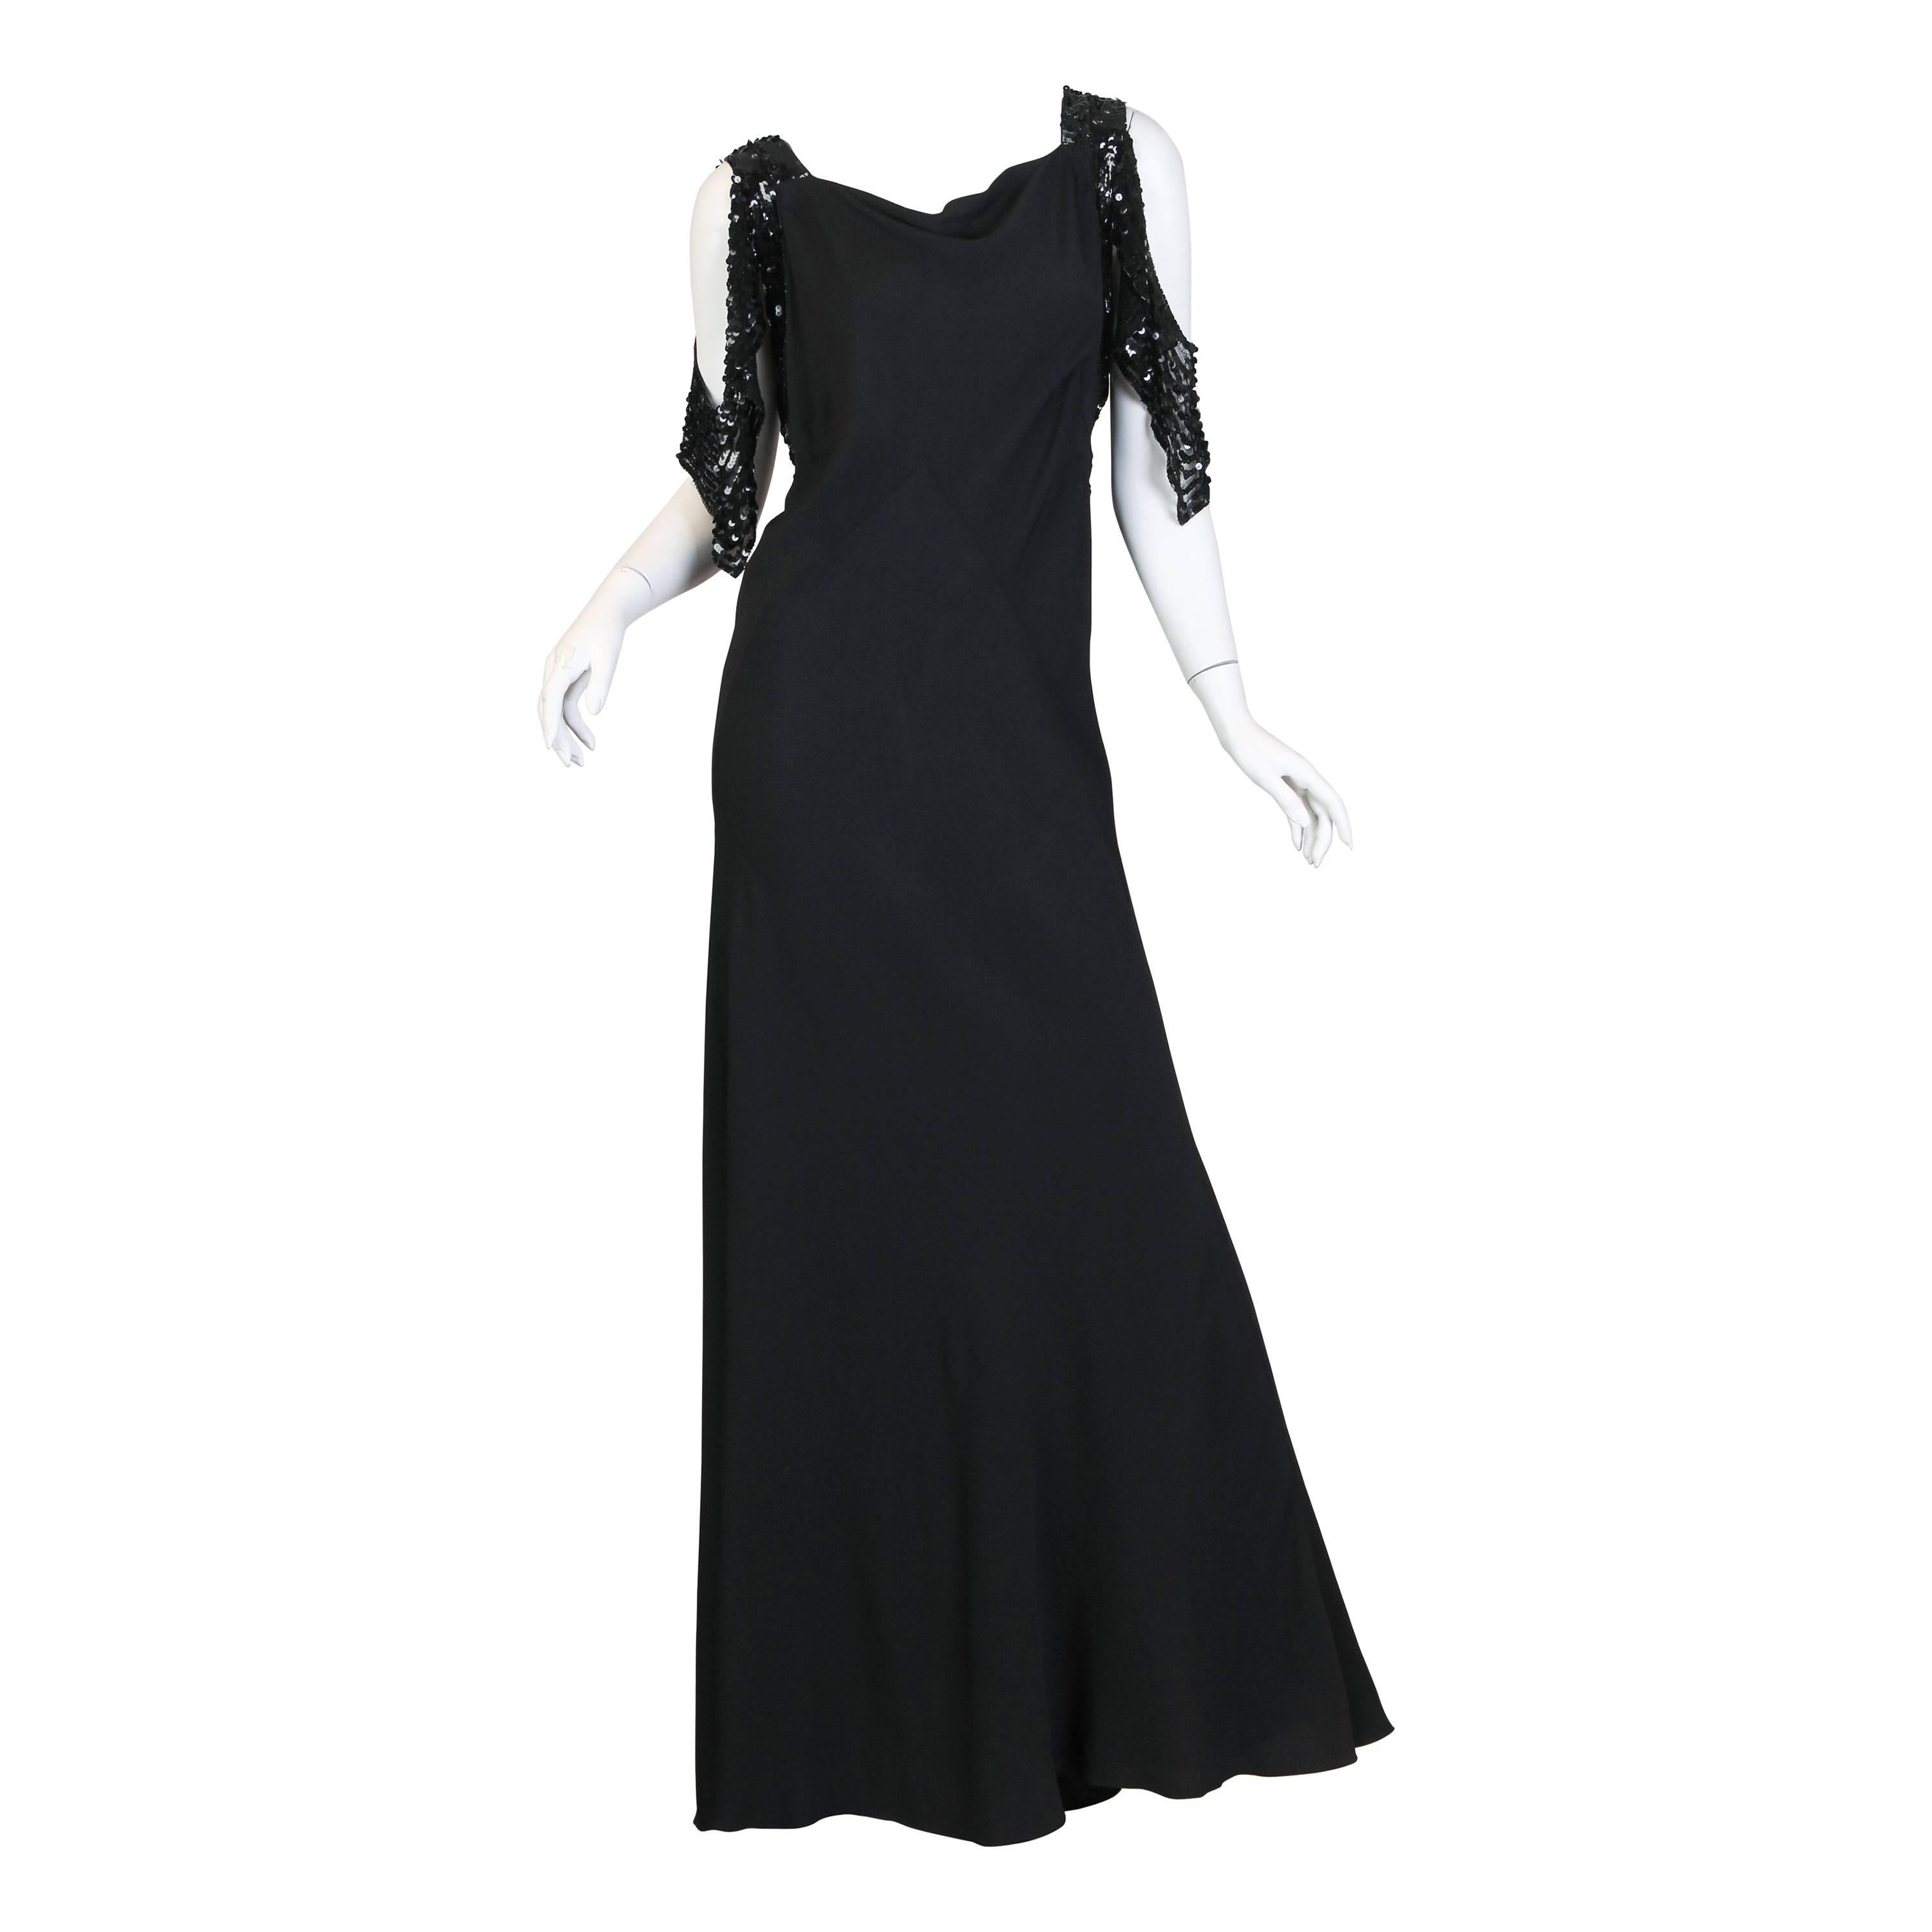 1930S Black Bias Cut Rayon Crepe Gown With Celluloid Sequin Peek-A-Boo Sleeves For Sale